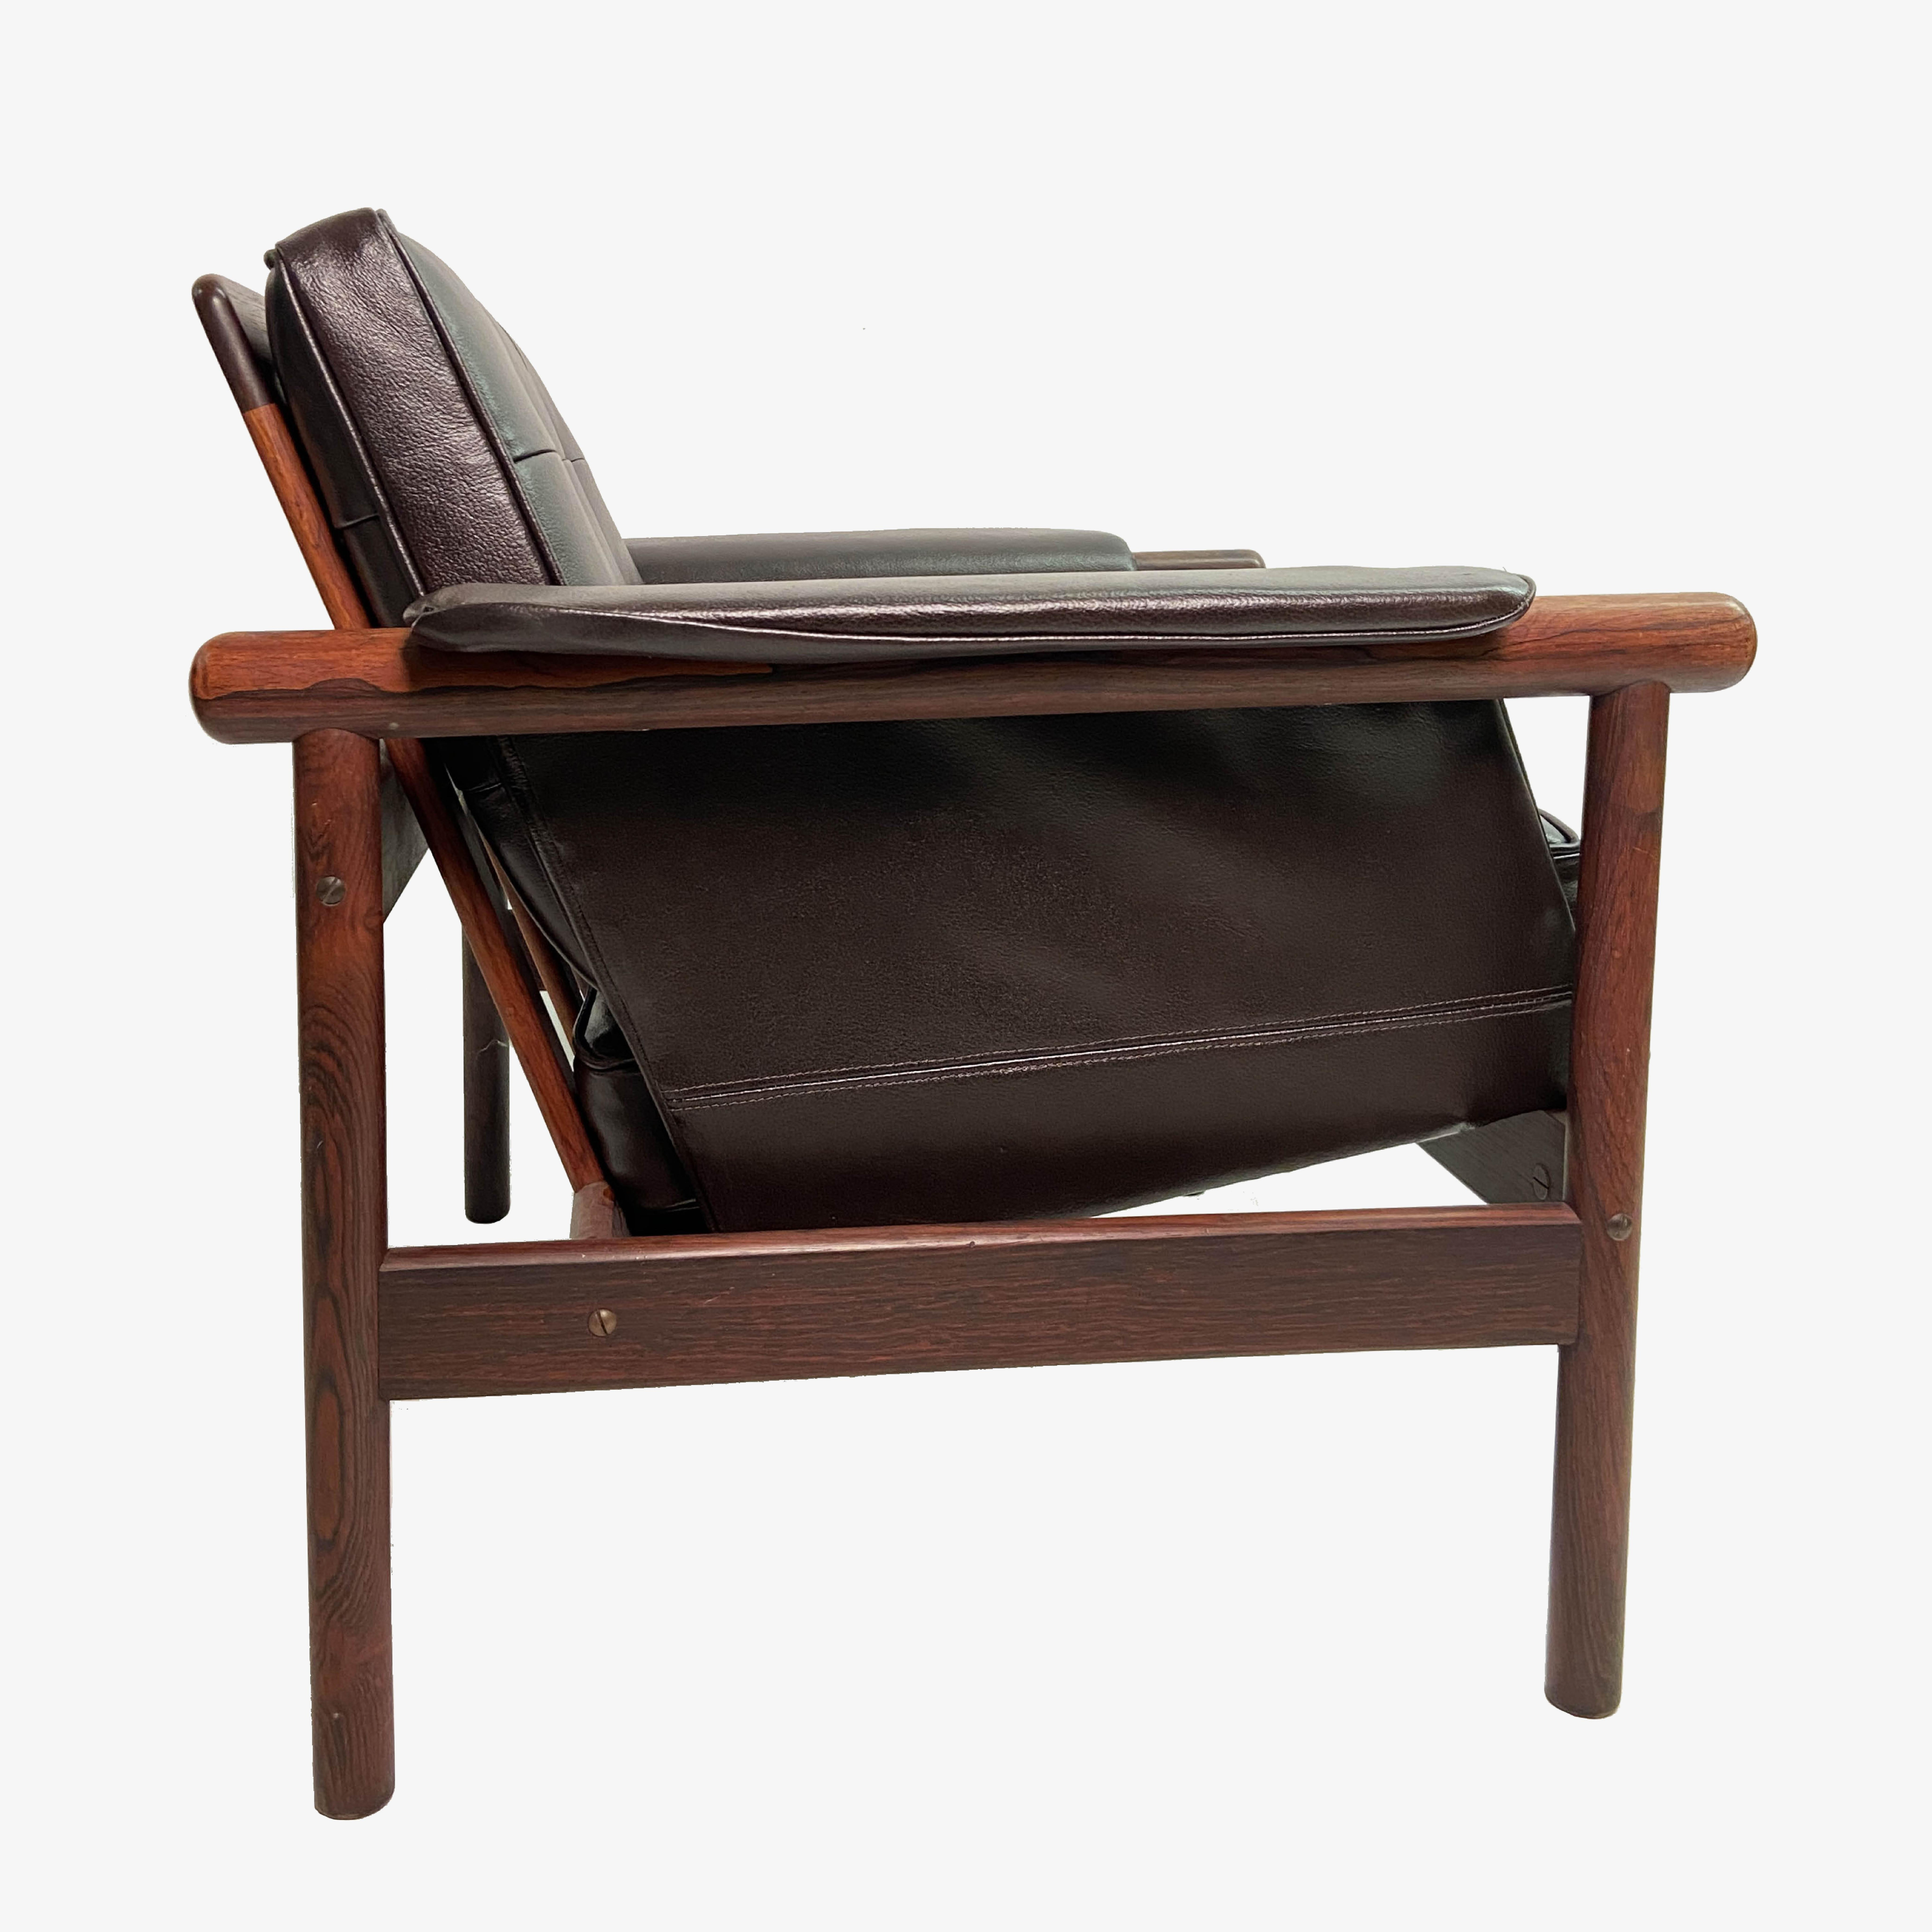 Illum Wikkelsø 'Wiki' Lounge Chairs in Rosewood and Espresso Leather, Pair In Good Condition For Sale In Wilton, CT